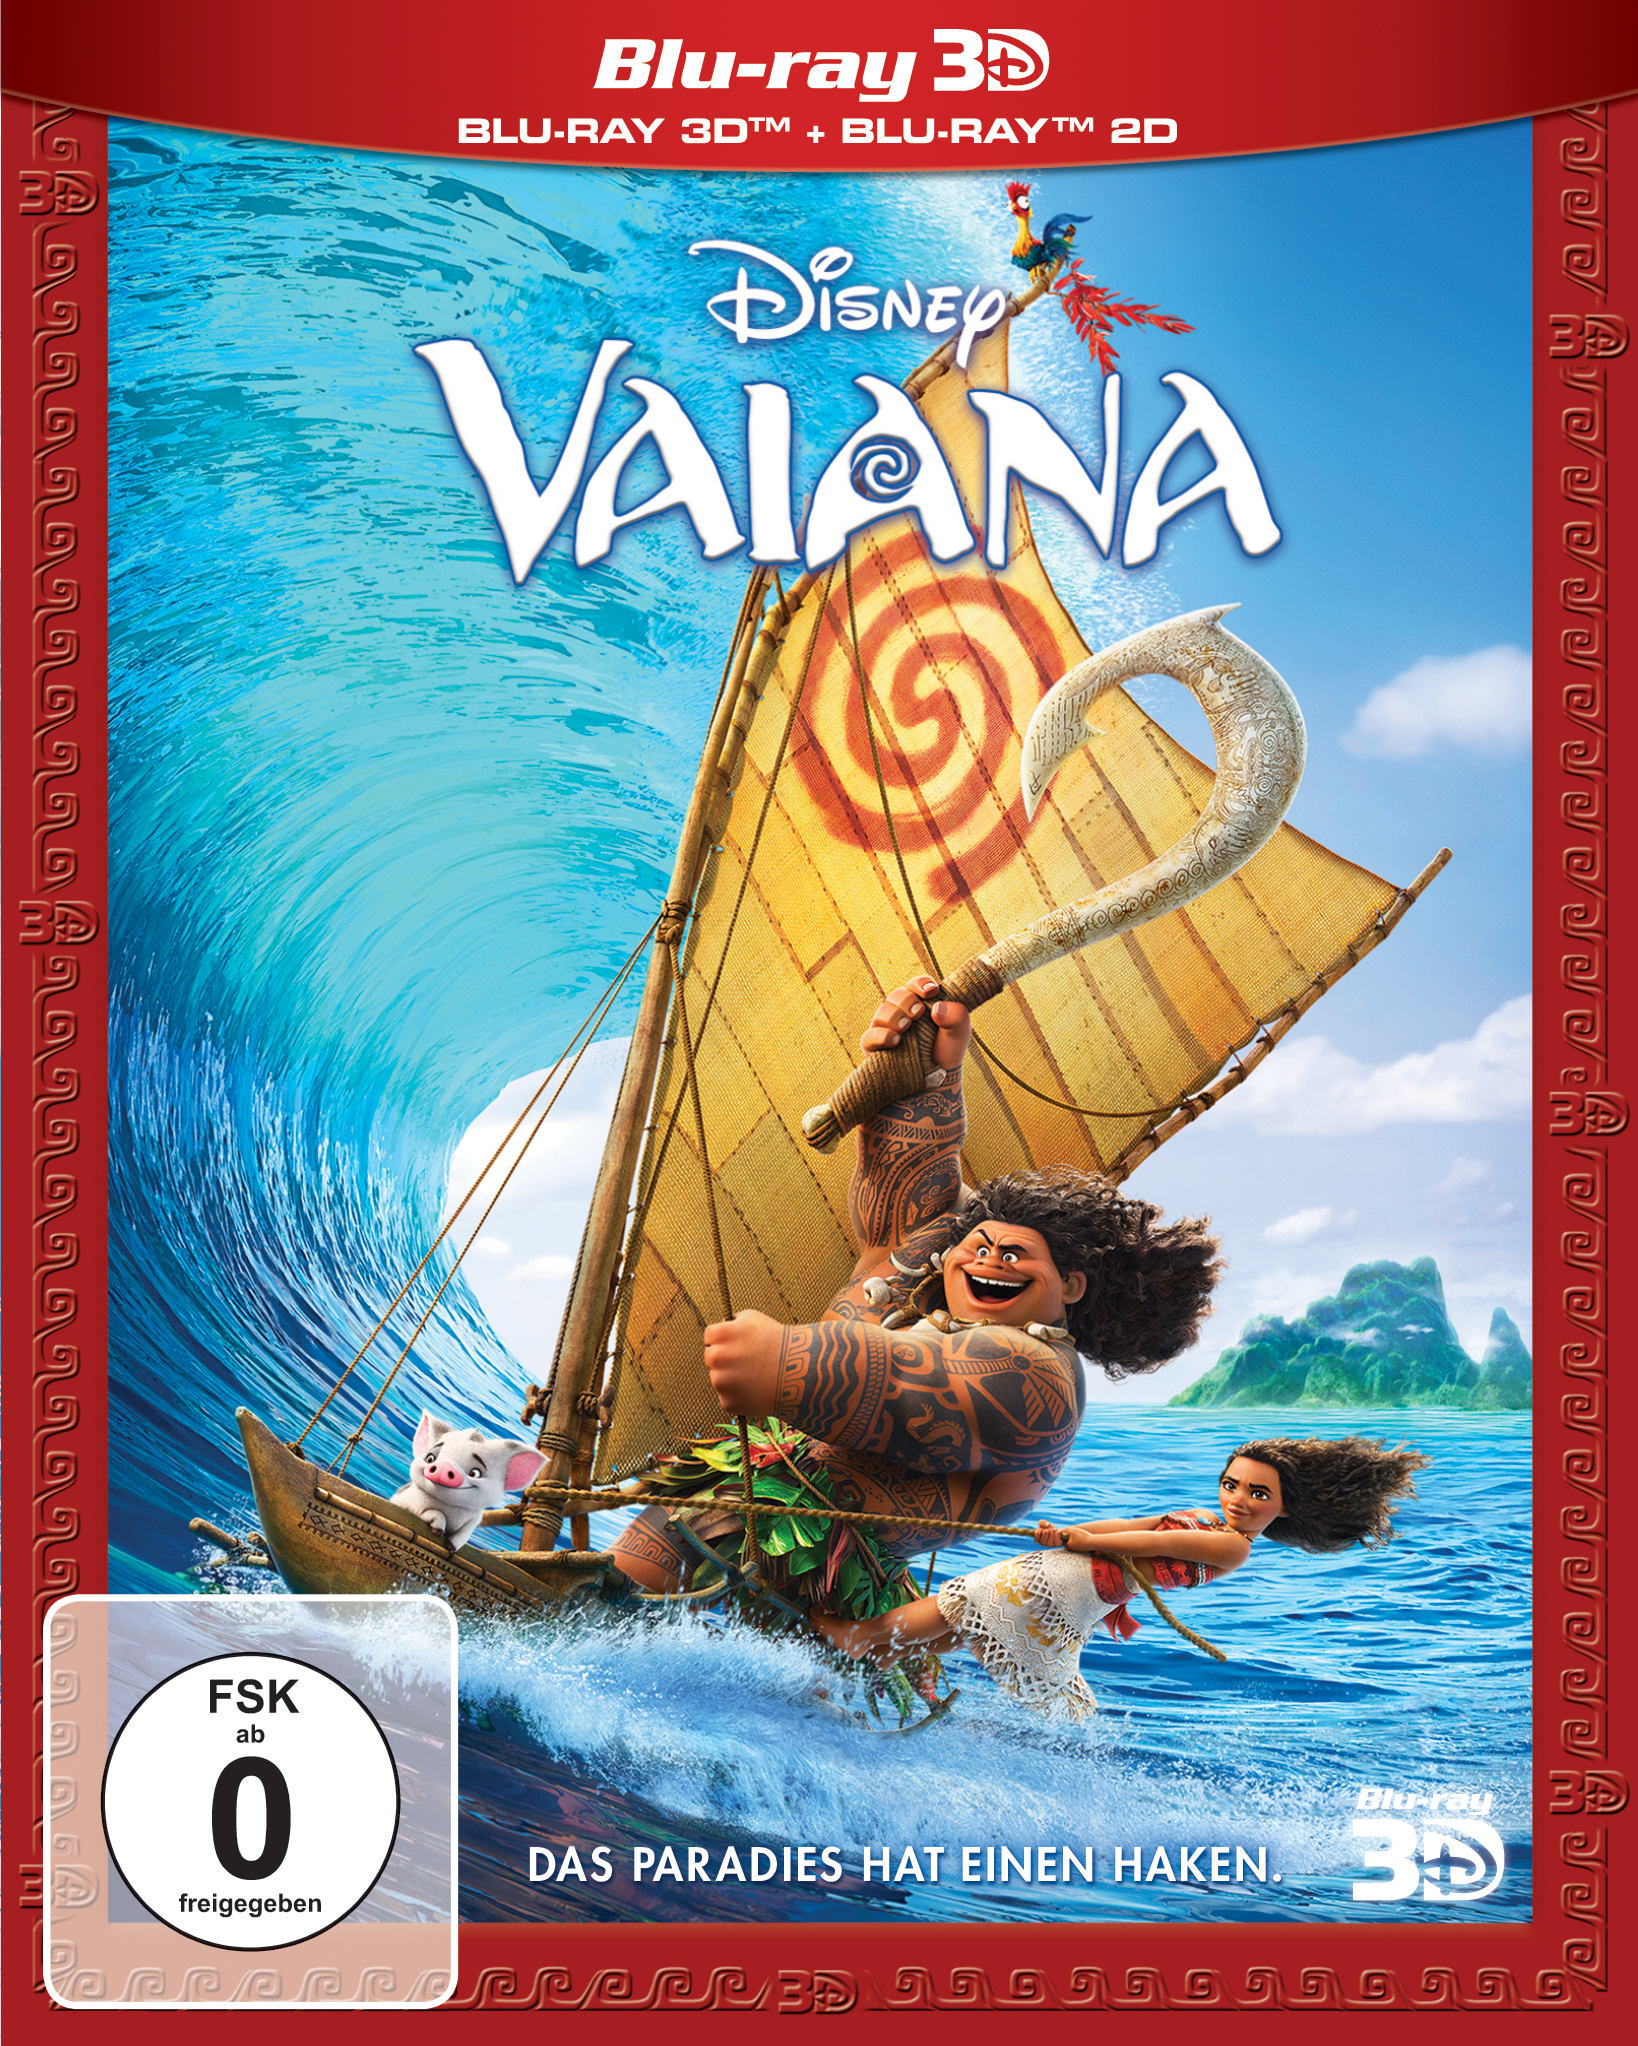 Blu-ray Vaiana 3D Edition) (Special (+2D)